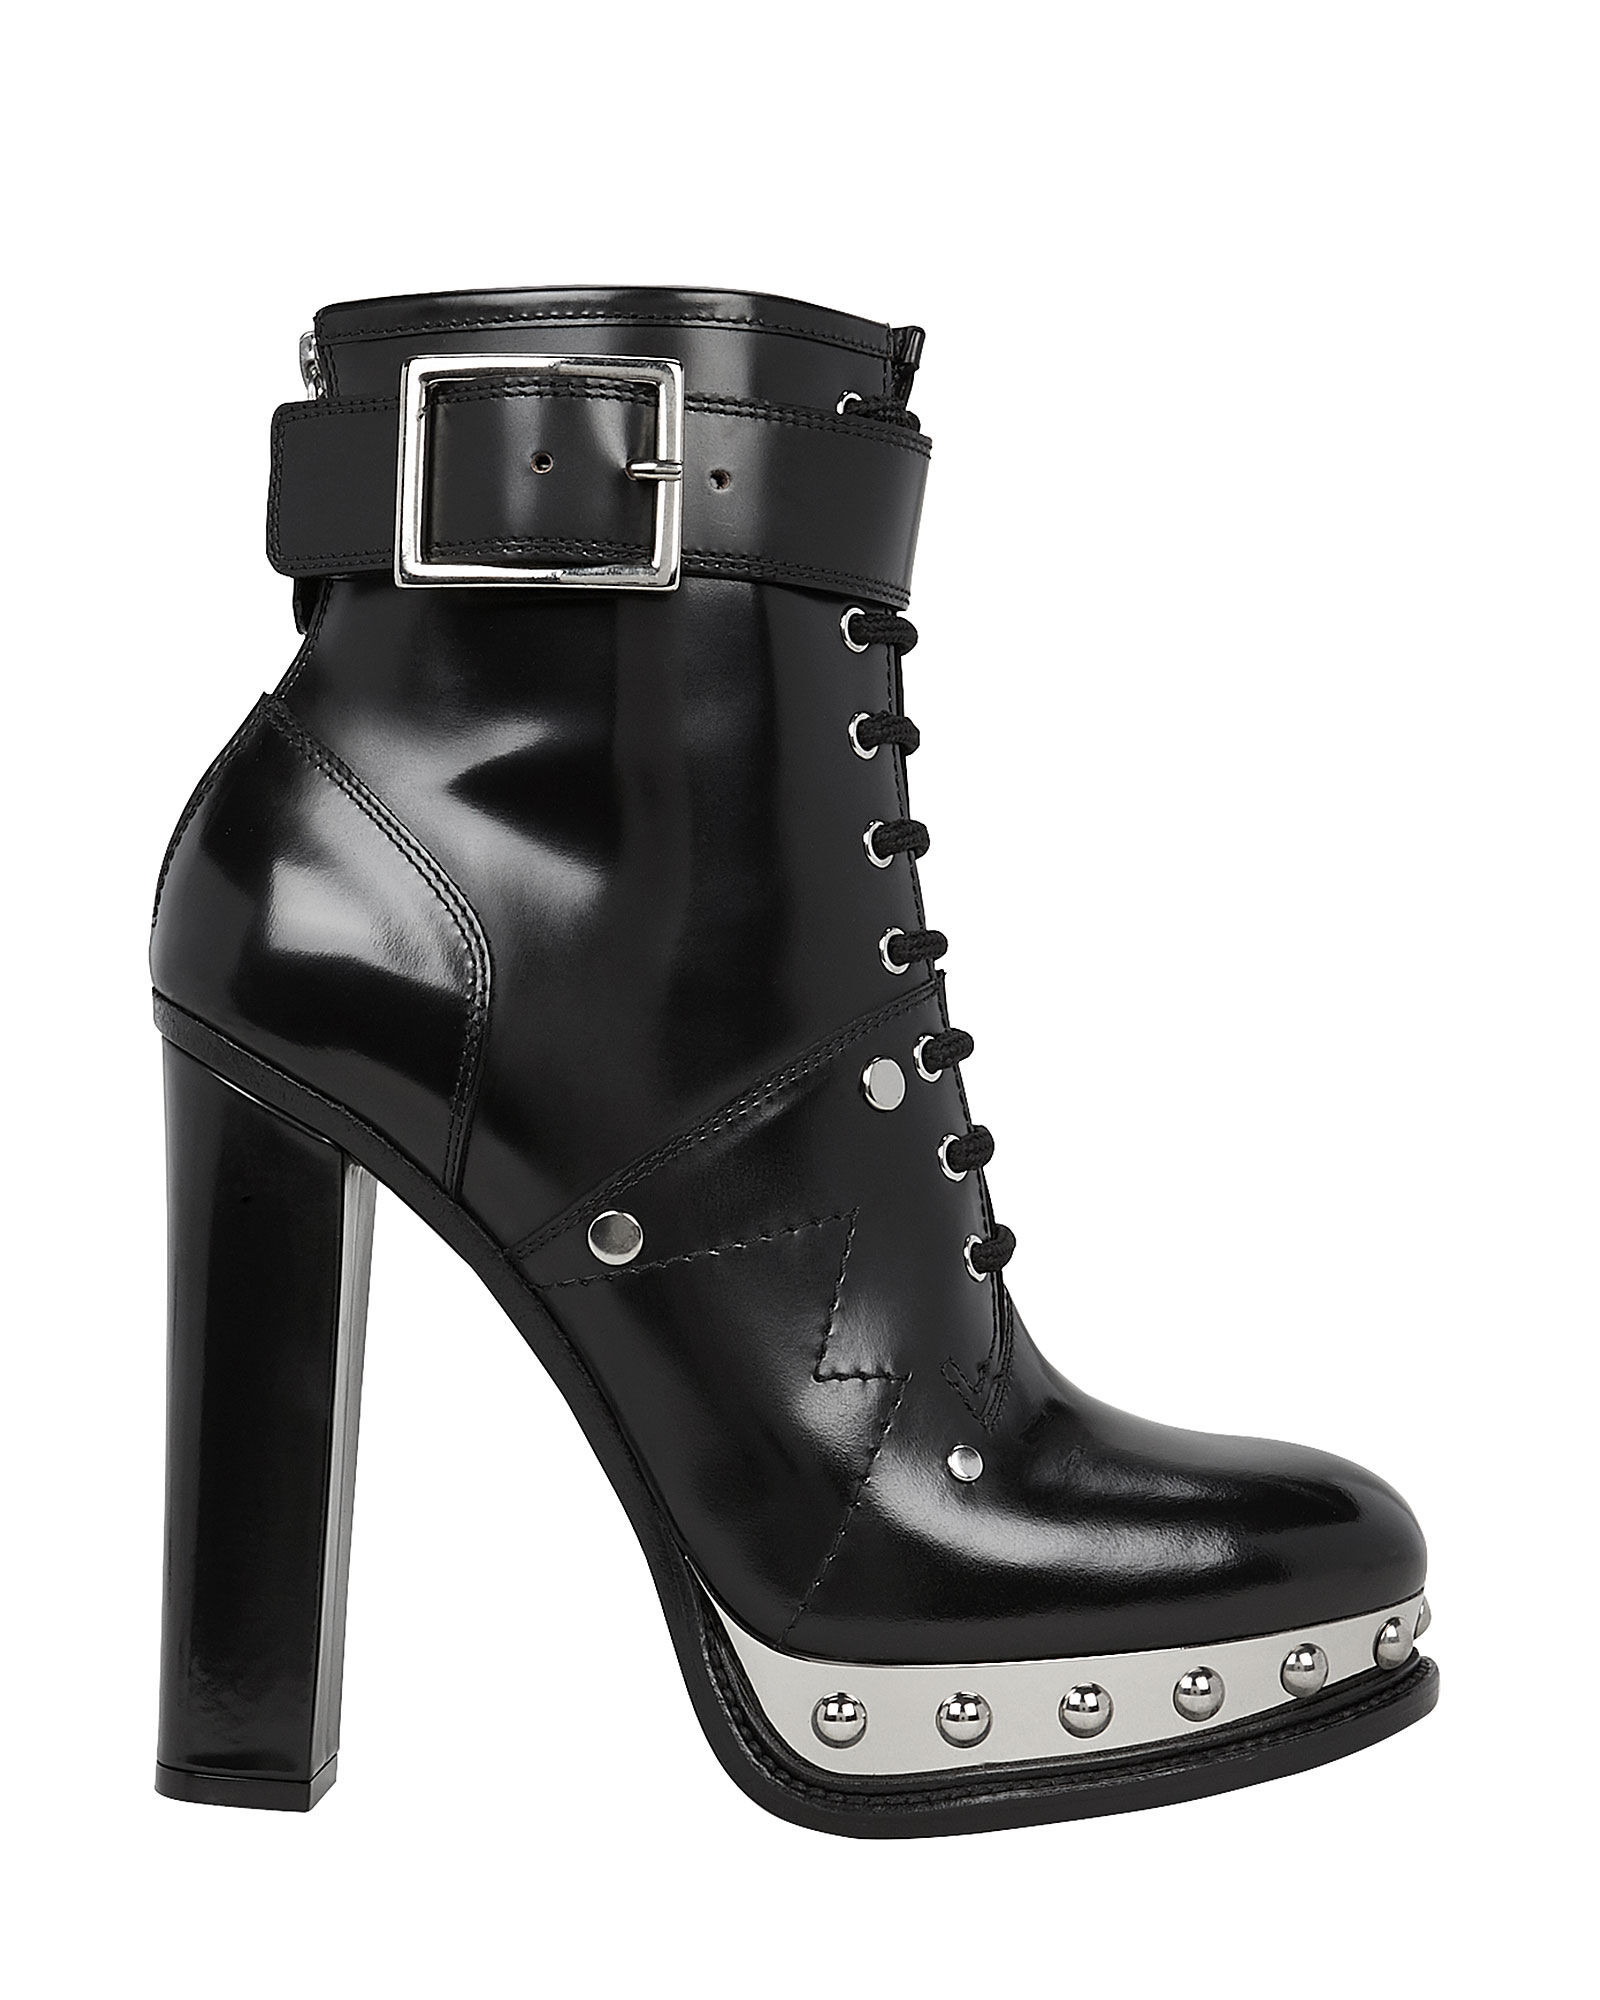 Alexander McQueen Silver Sole Lace-Up Ankle Boots